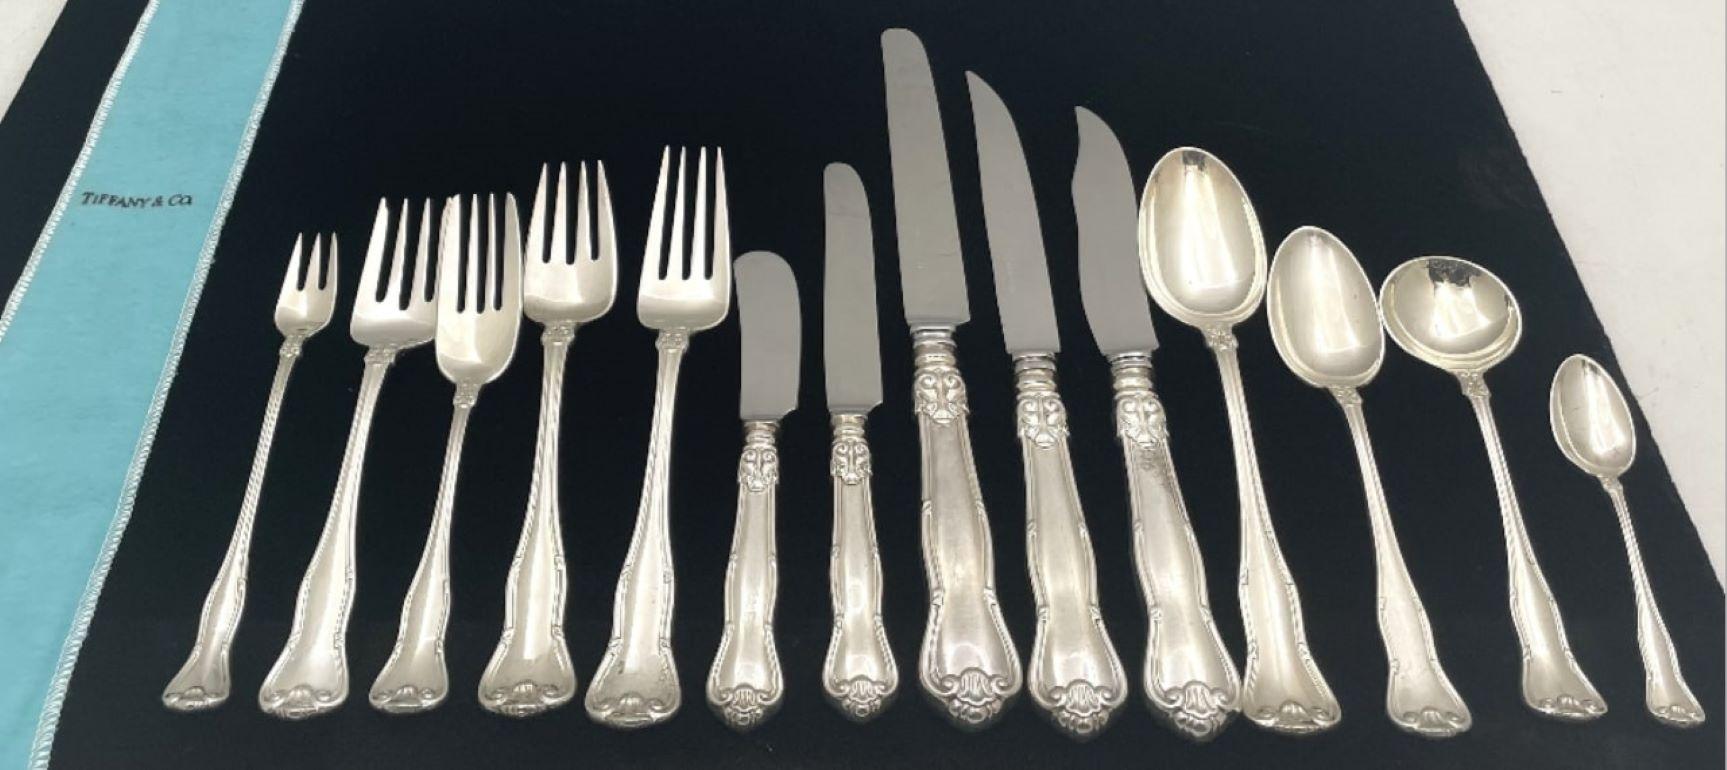 American 30% OFF Tiffany & Co. Sterling Silver 180-Piece Provence Flatware Set w/ Servers For Sale